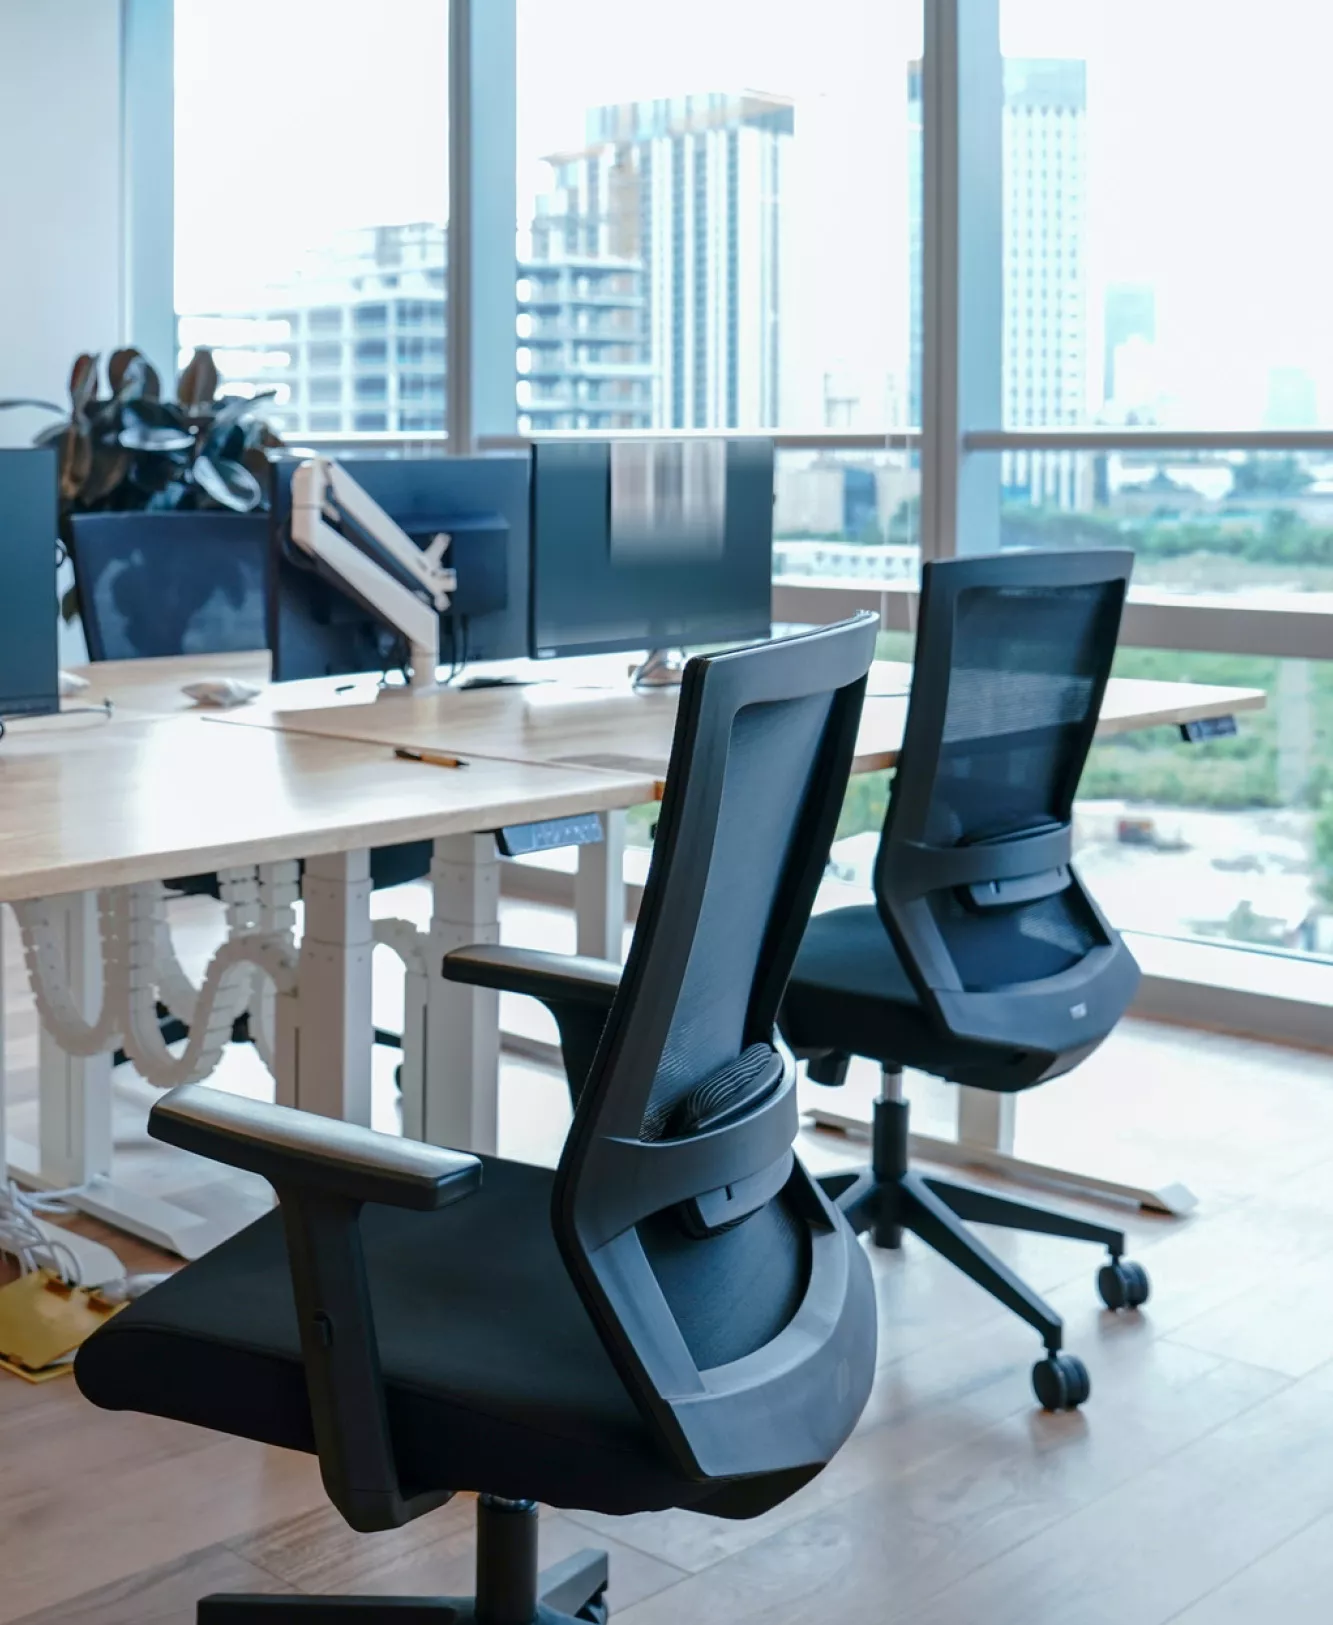 Empty office chairs around a conference table in a downtown office environment.